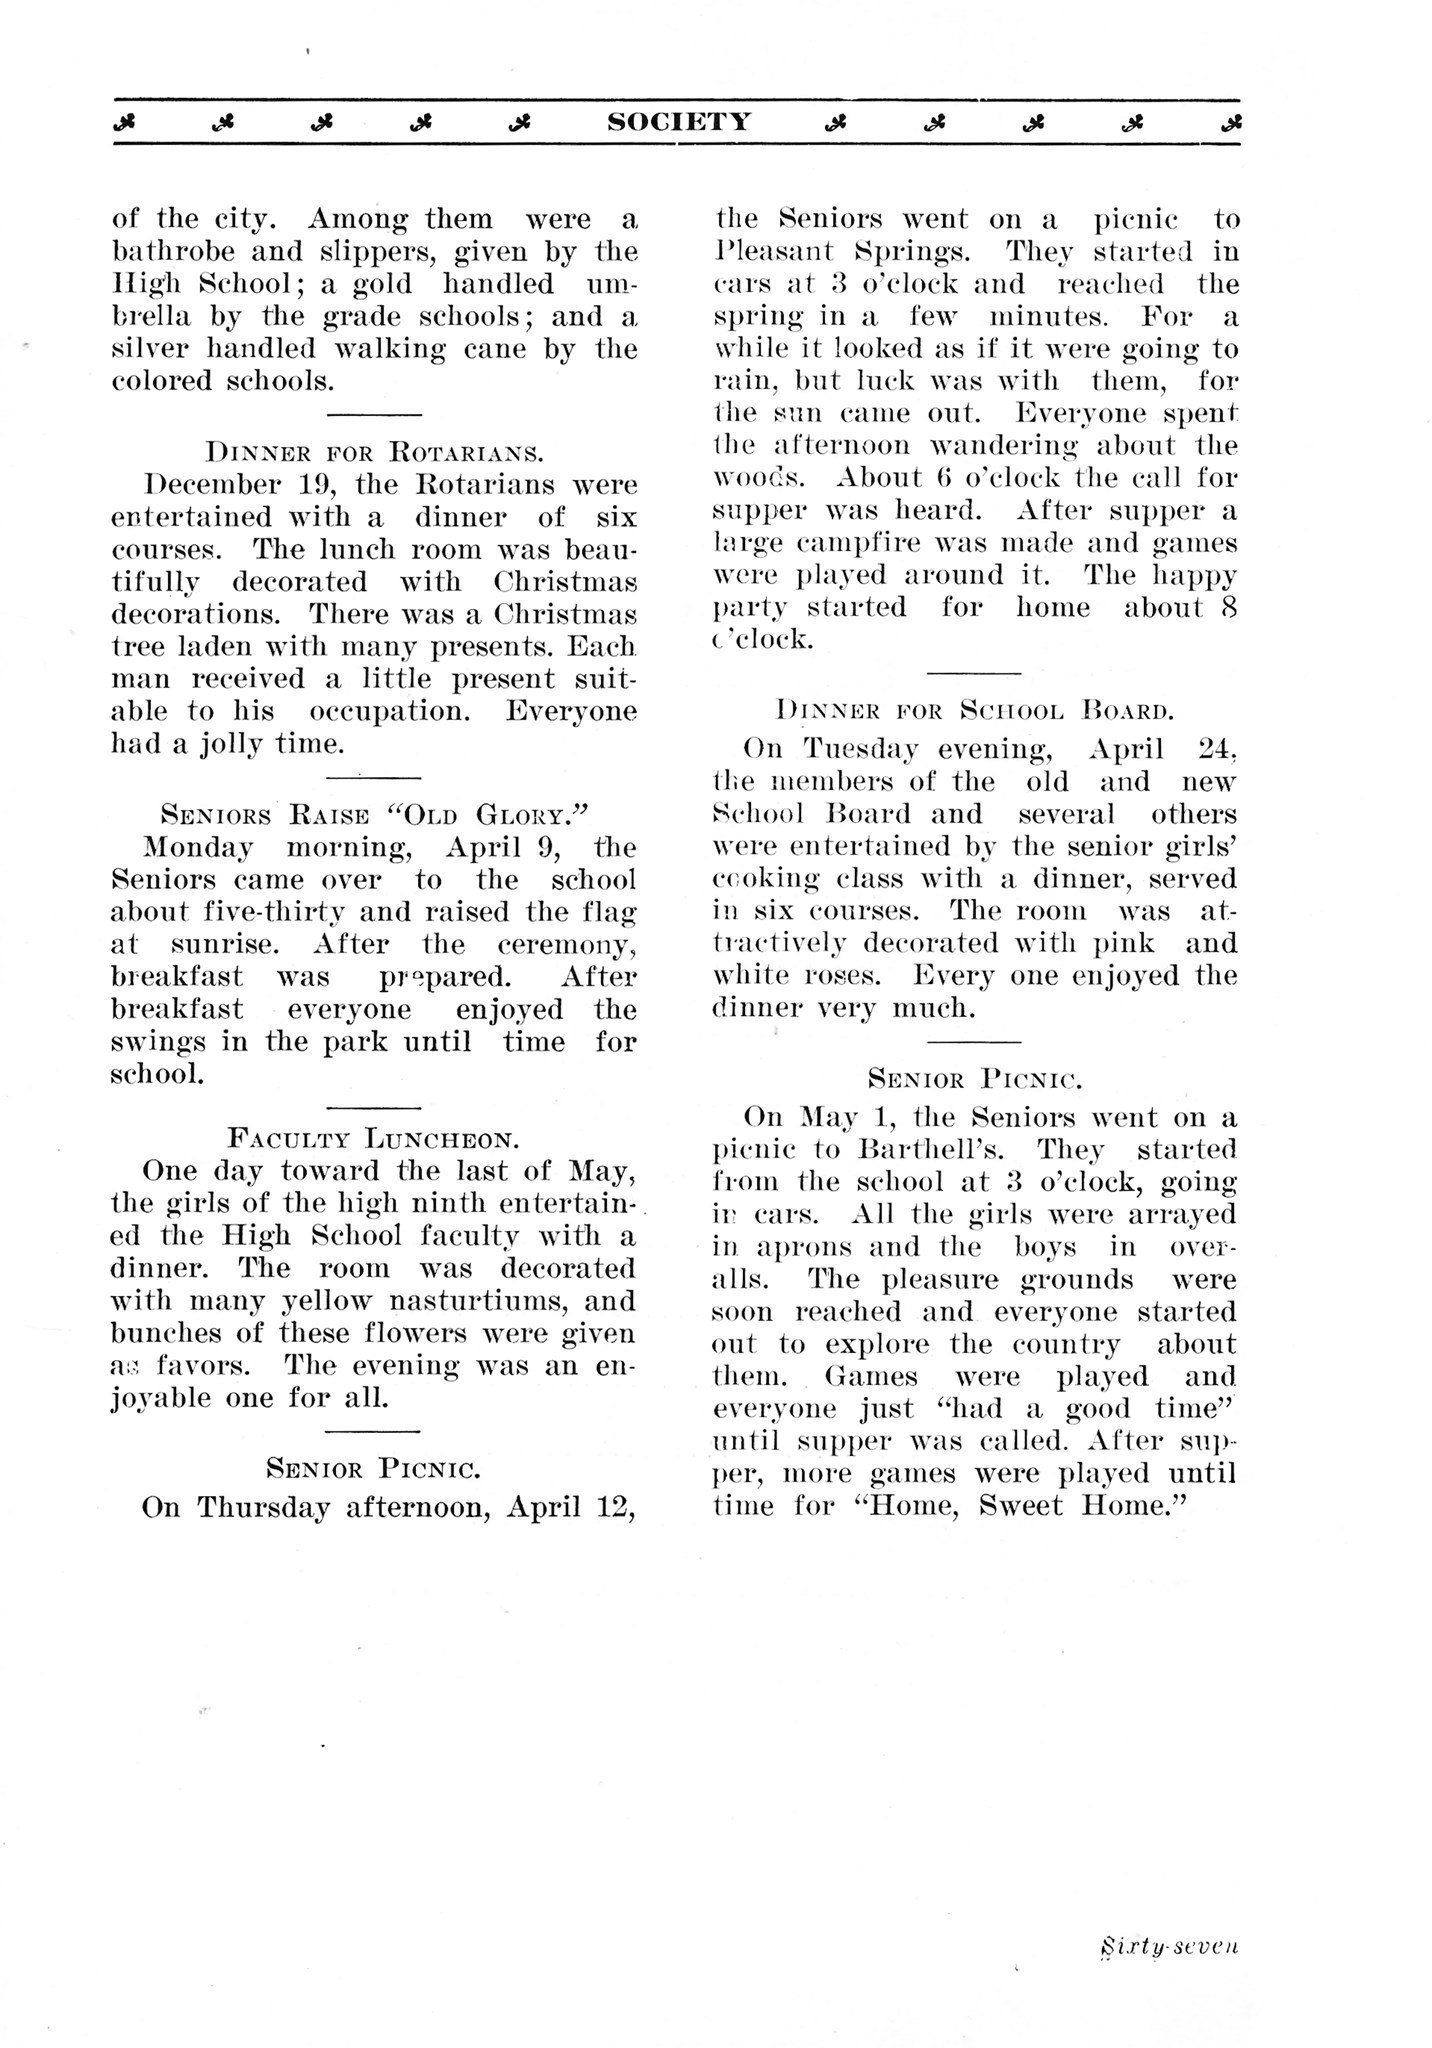 ../../../Images/Large/1917/Arclight-1917-pg0067.jpg